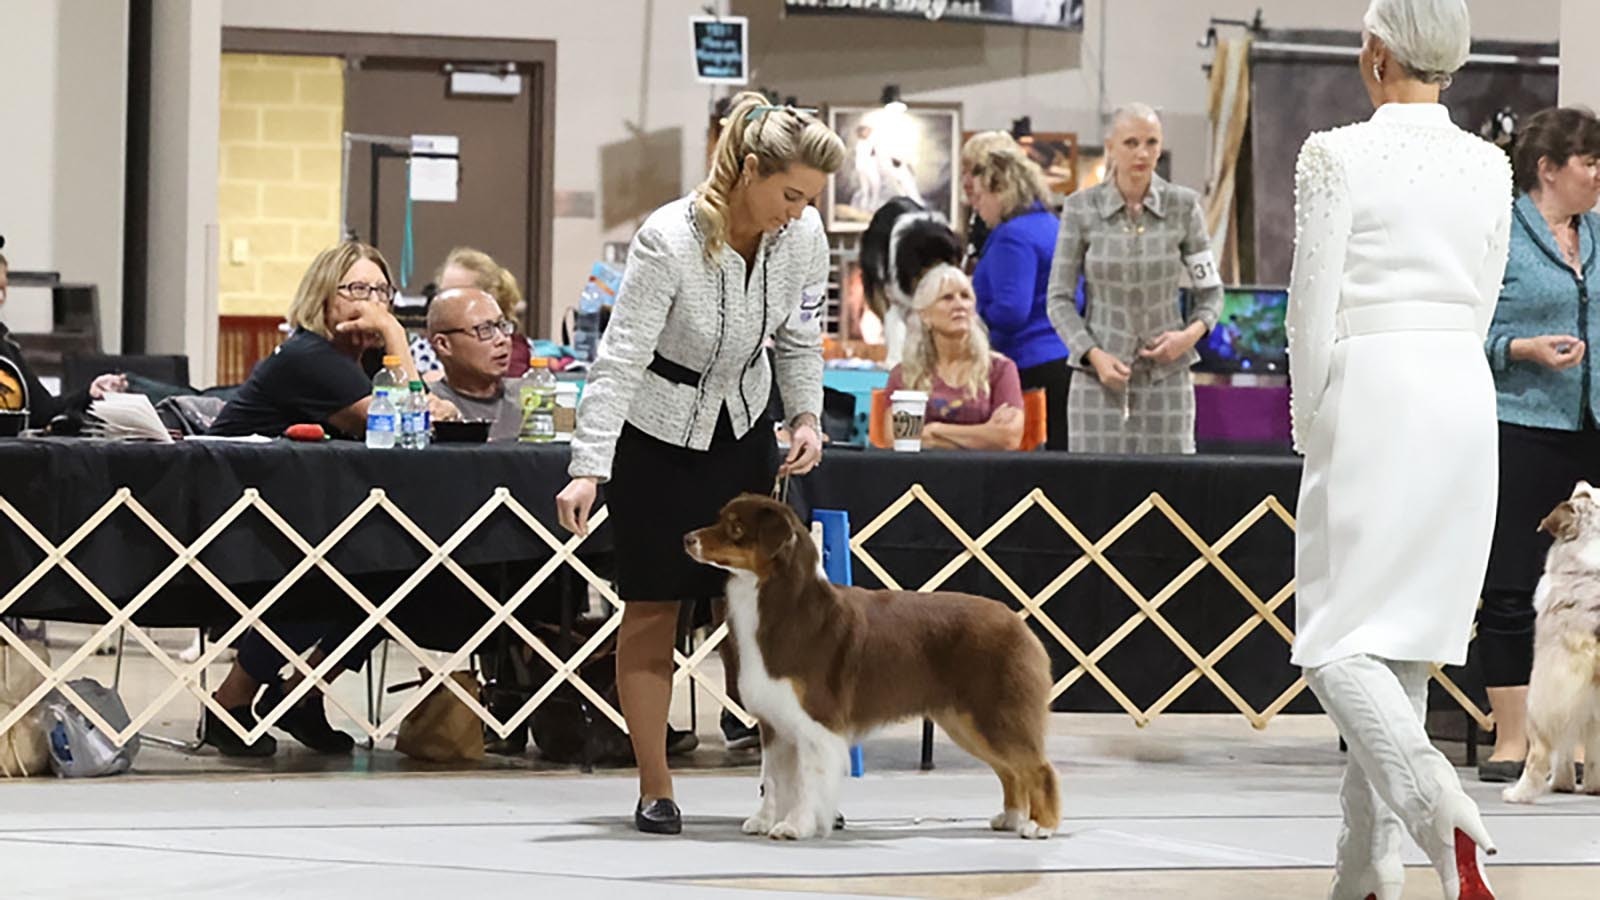 At Westminster, as well as other competitions, Sansa is judge on how well she represents the characteristics of her breed.